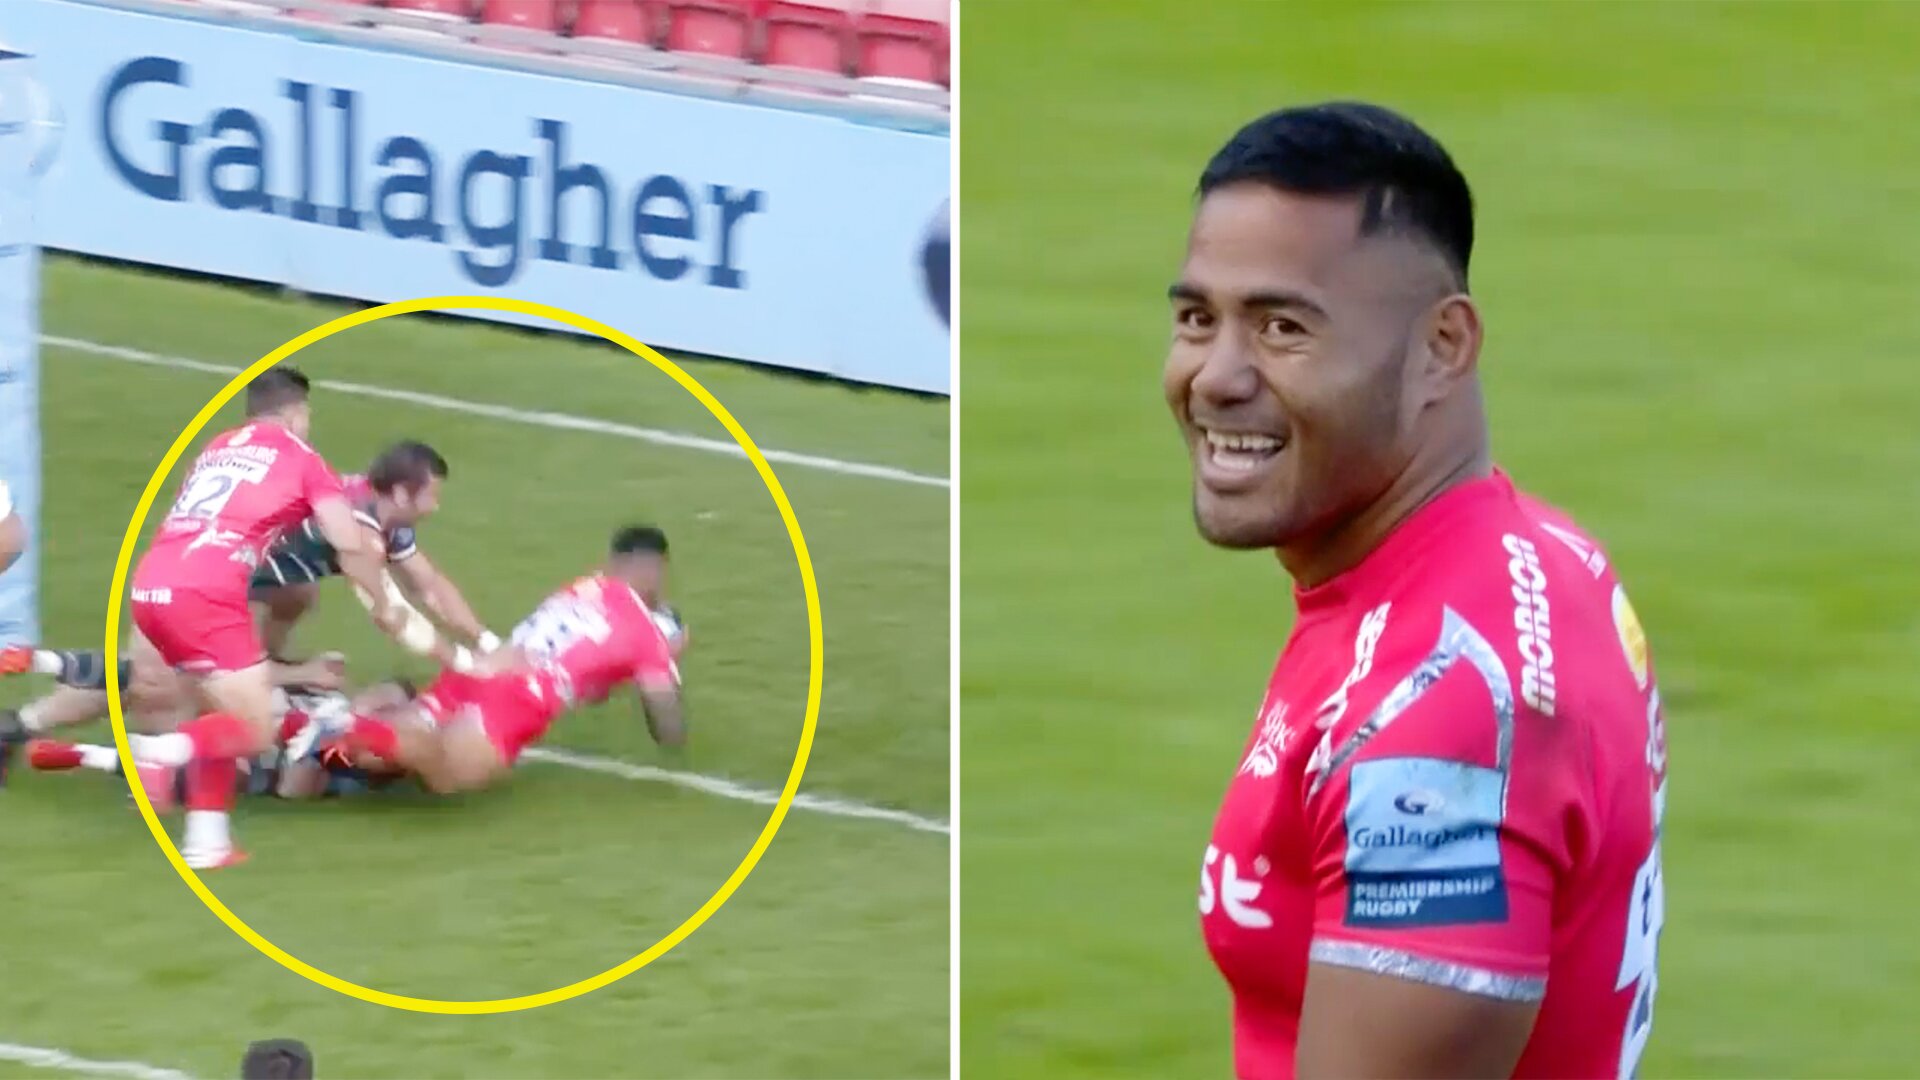 Tuilagi scores sensational try on first game back at Welford Road against former club